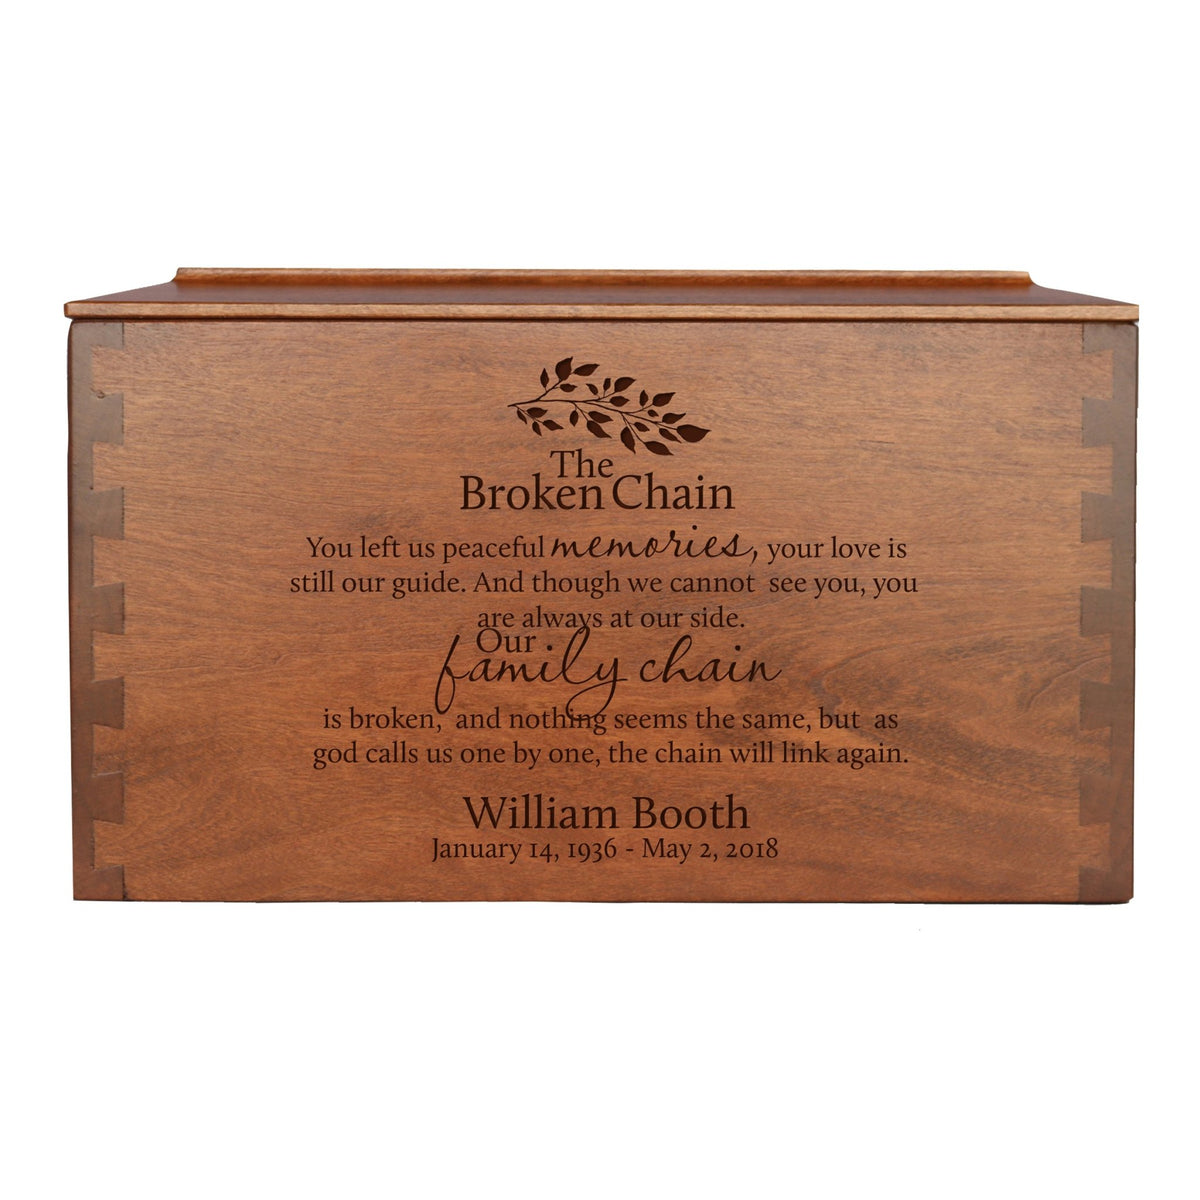 Custom Wooden Cremation Urn Box Extra Large for Human Ashes holds 473 cu in The Broken Chain (leaves) - LifeSong Milestones